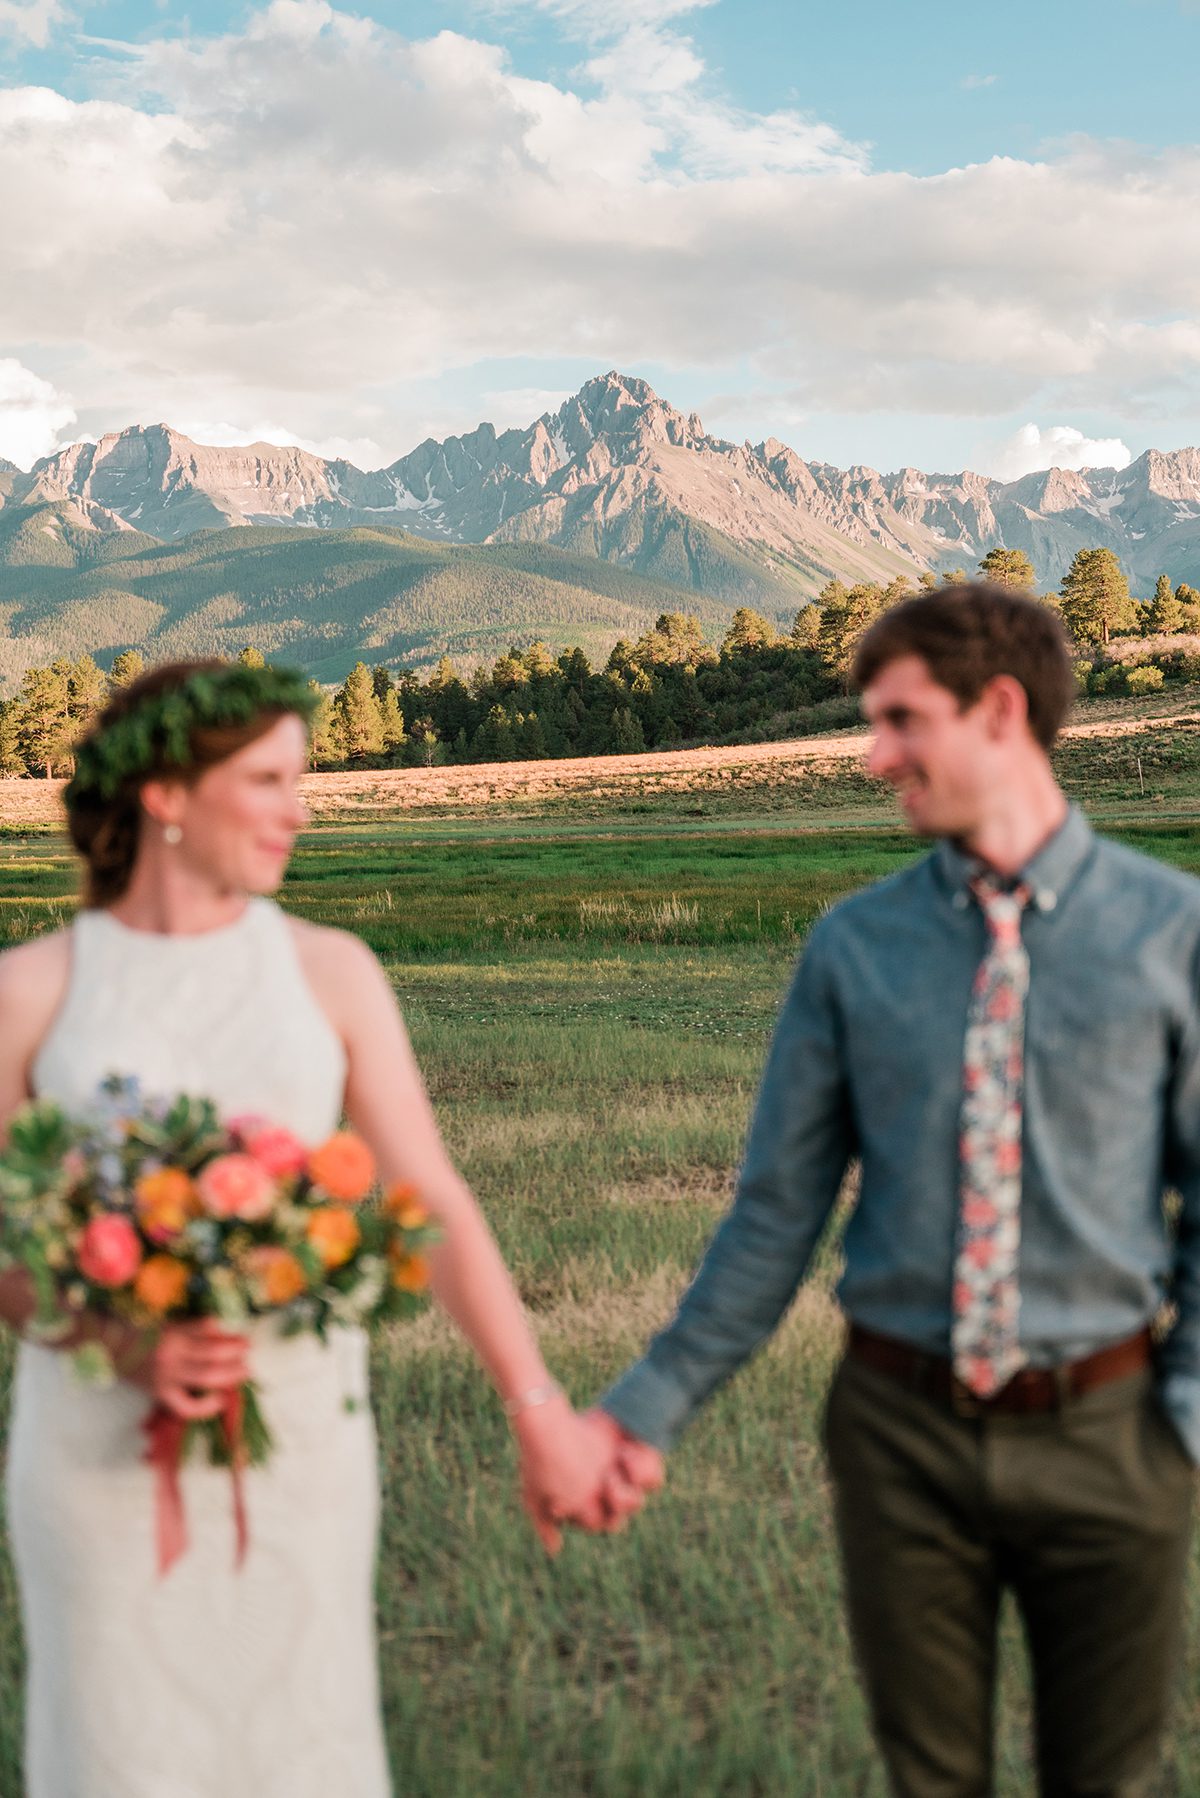 Sarah & Tom hold hands while the image is focused on the mountains behind them